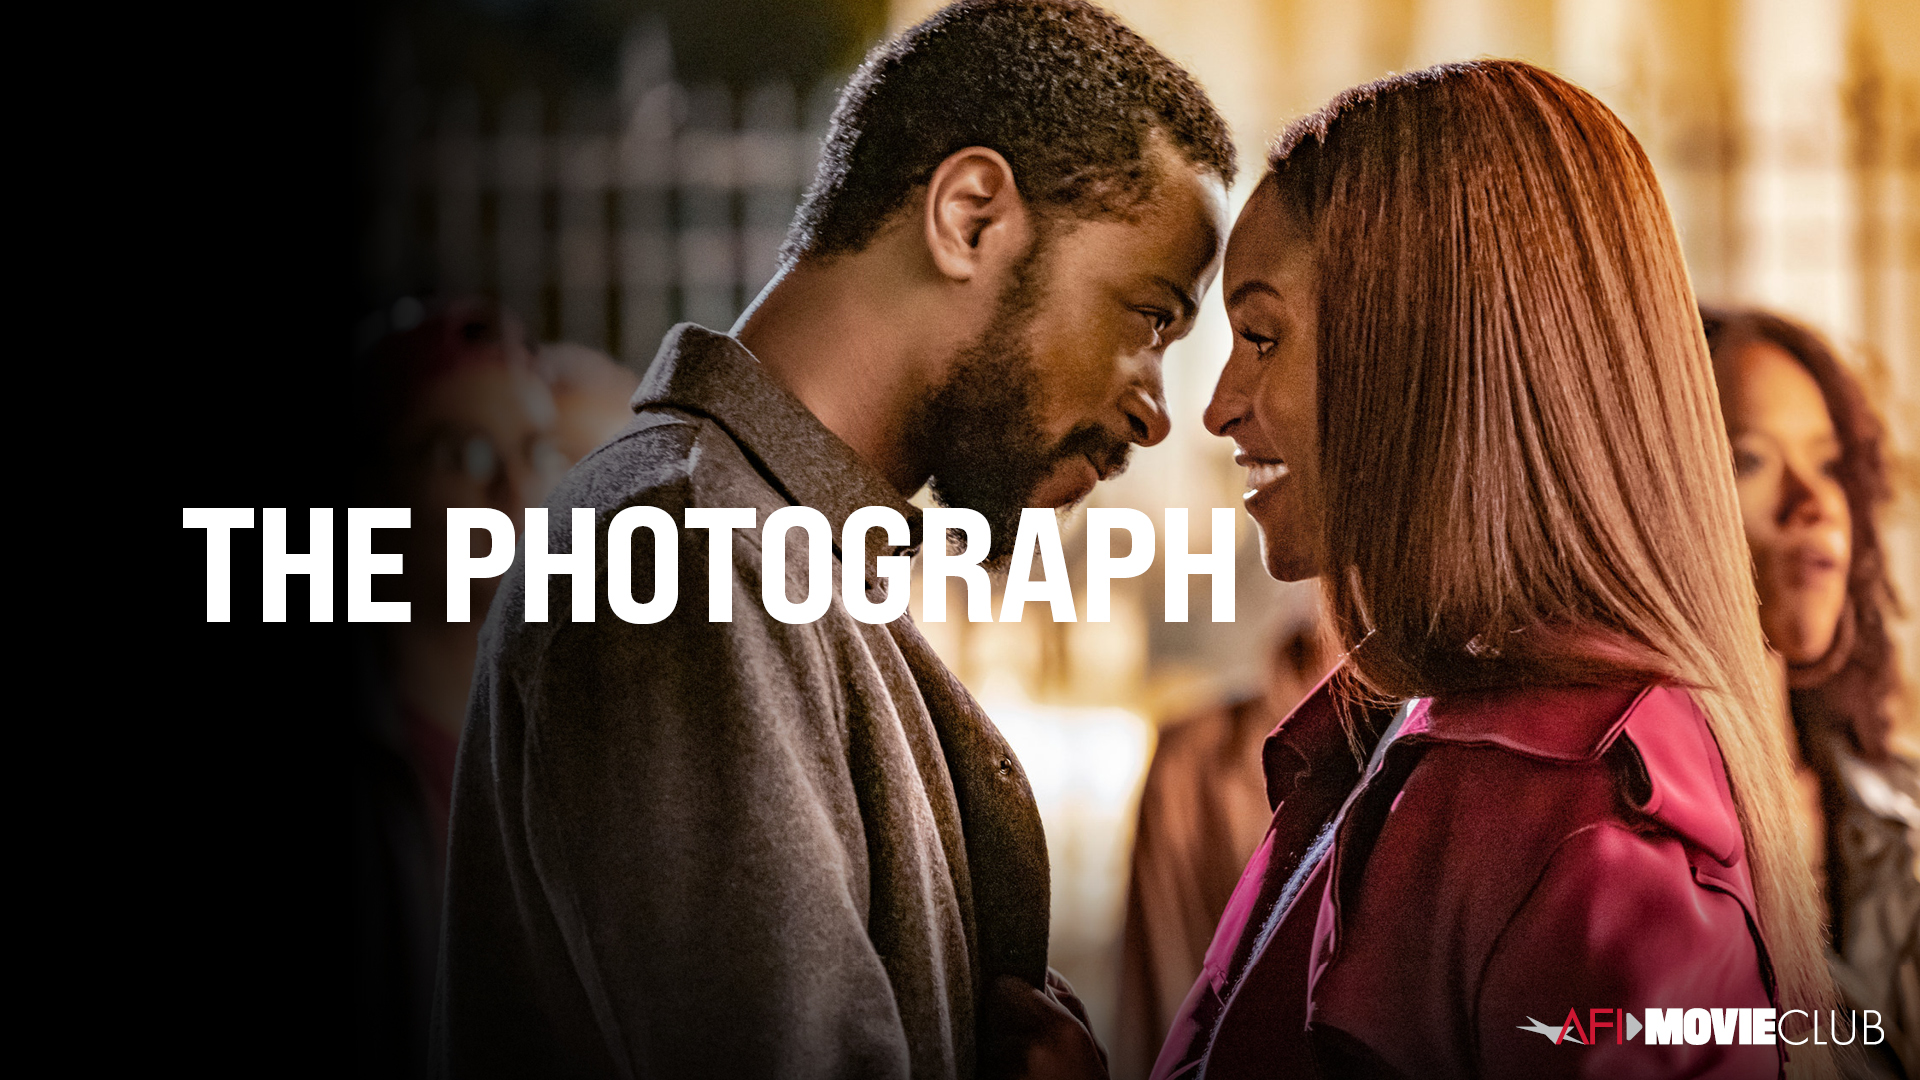 The Photograph Film Still - LaKeith Stanfield and Issa Rae